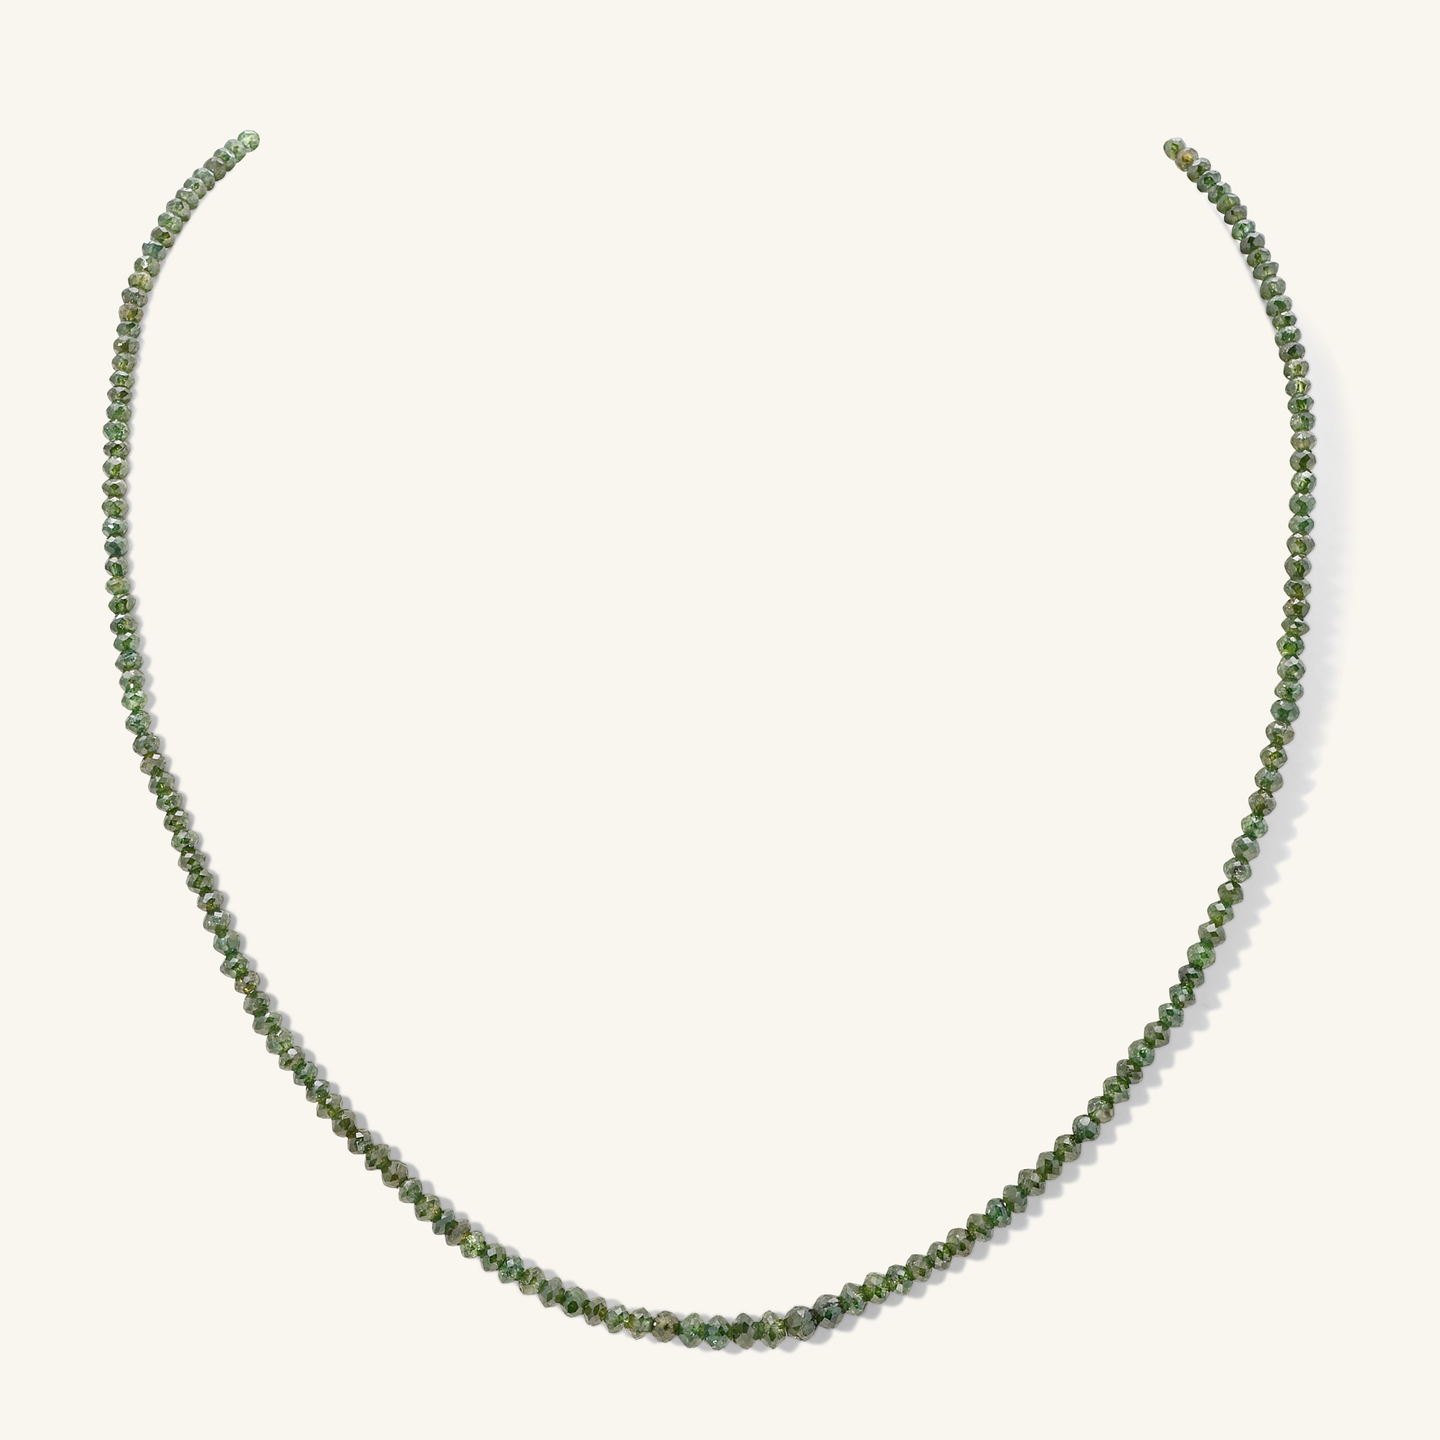 One of a Kind Juniper Leaf Green Diamond Beaded Necklace